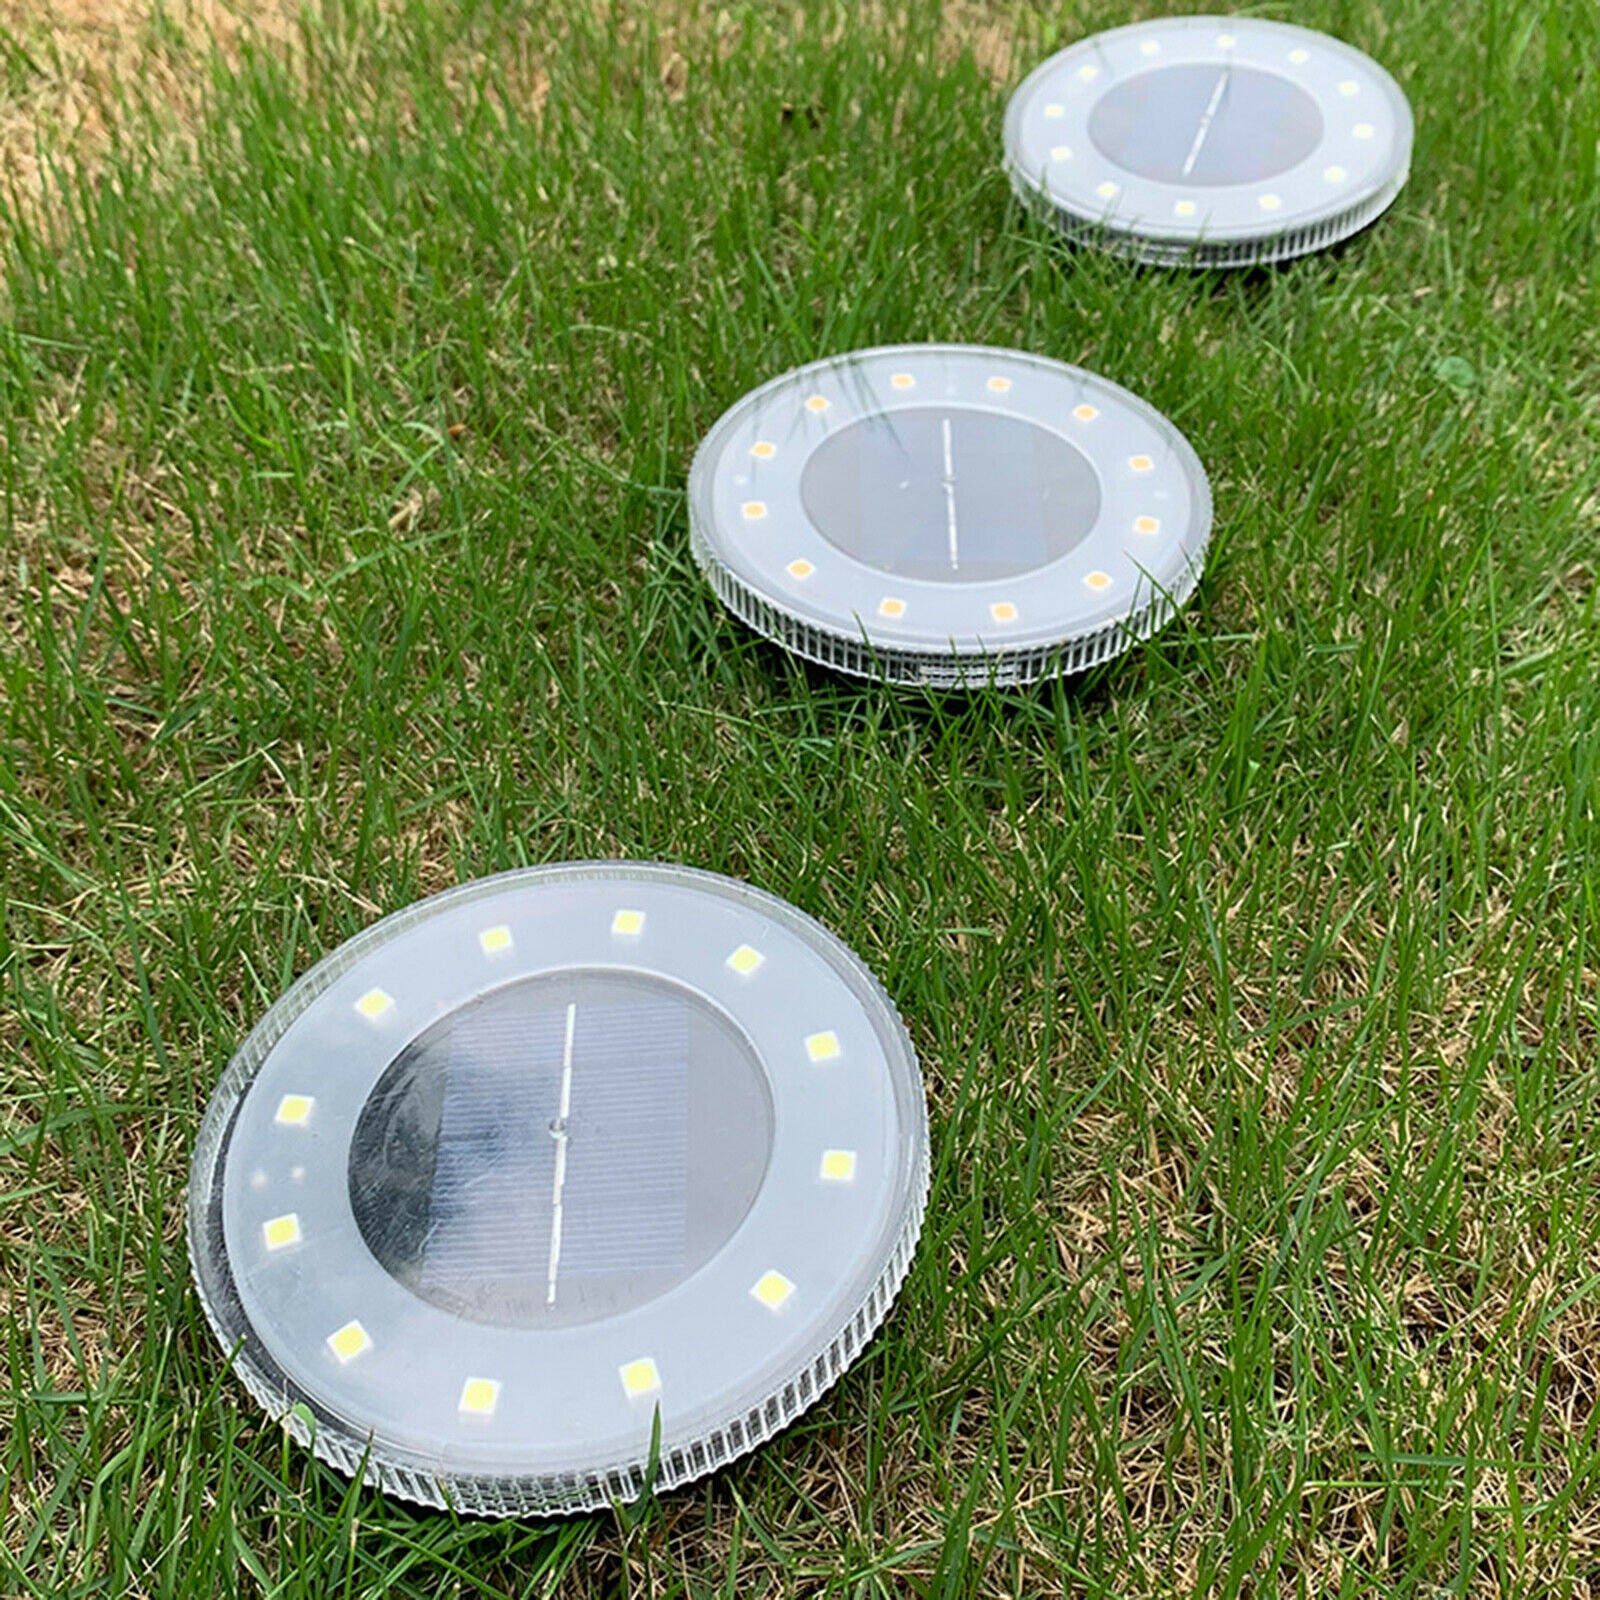 4 Pack of LED Buried Light Ground Solar Charger Backyard Pathway Decor